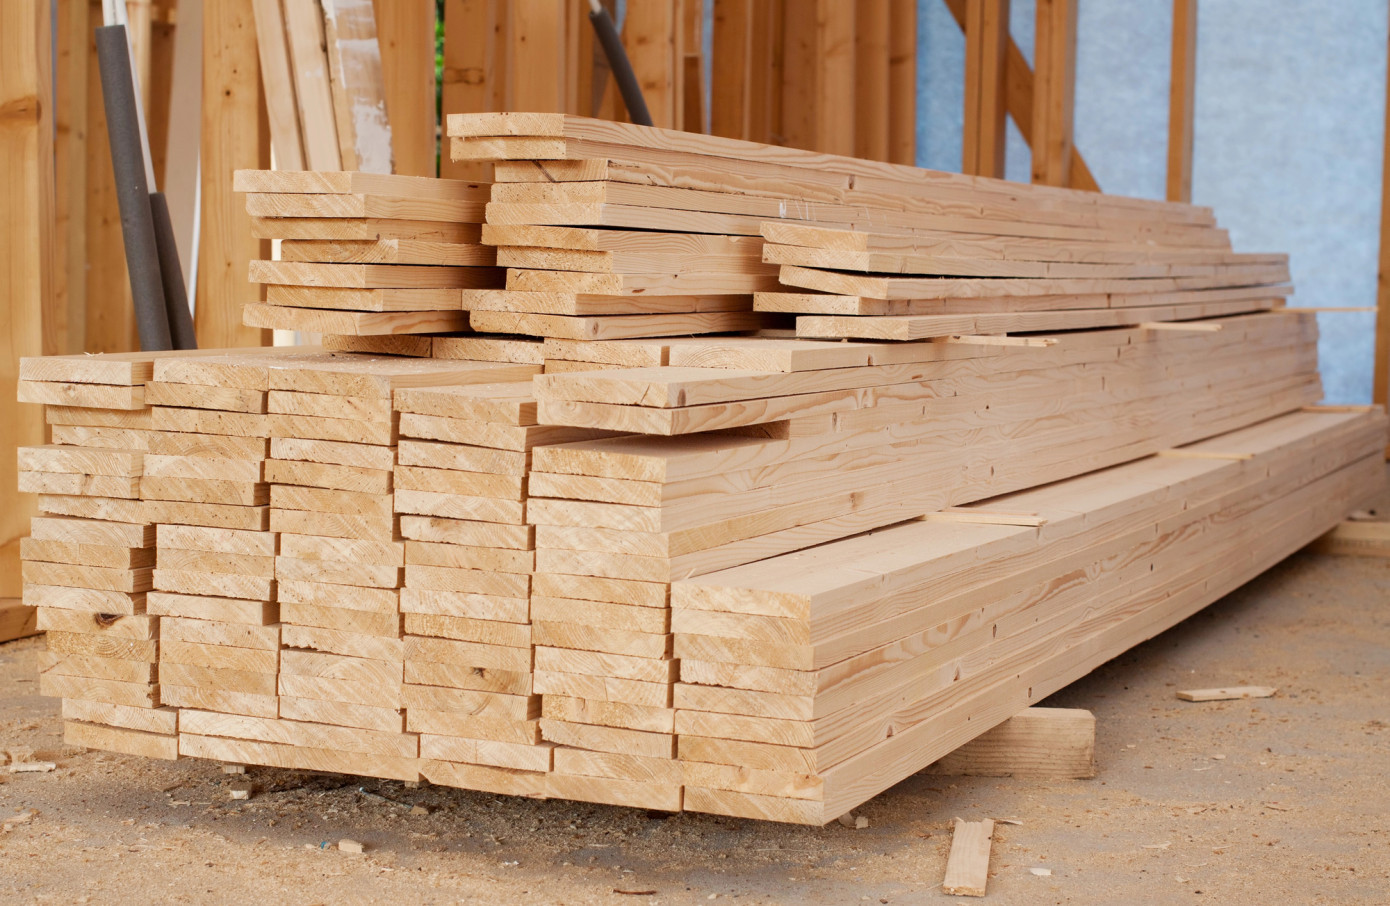 In April, price for lumber exported from Brazil down 3%